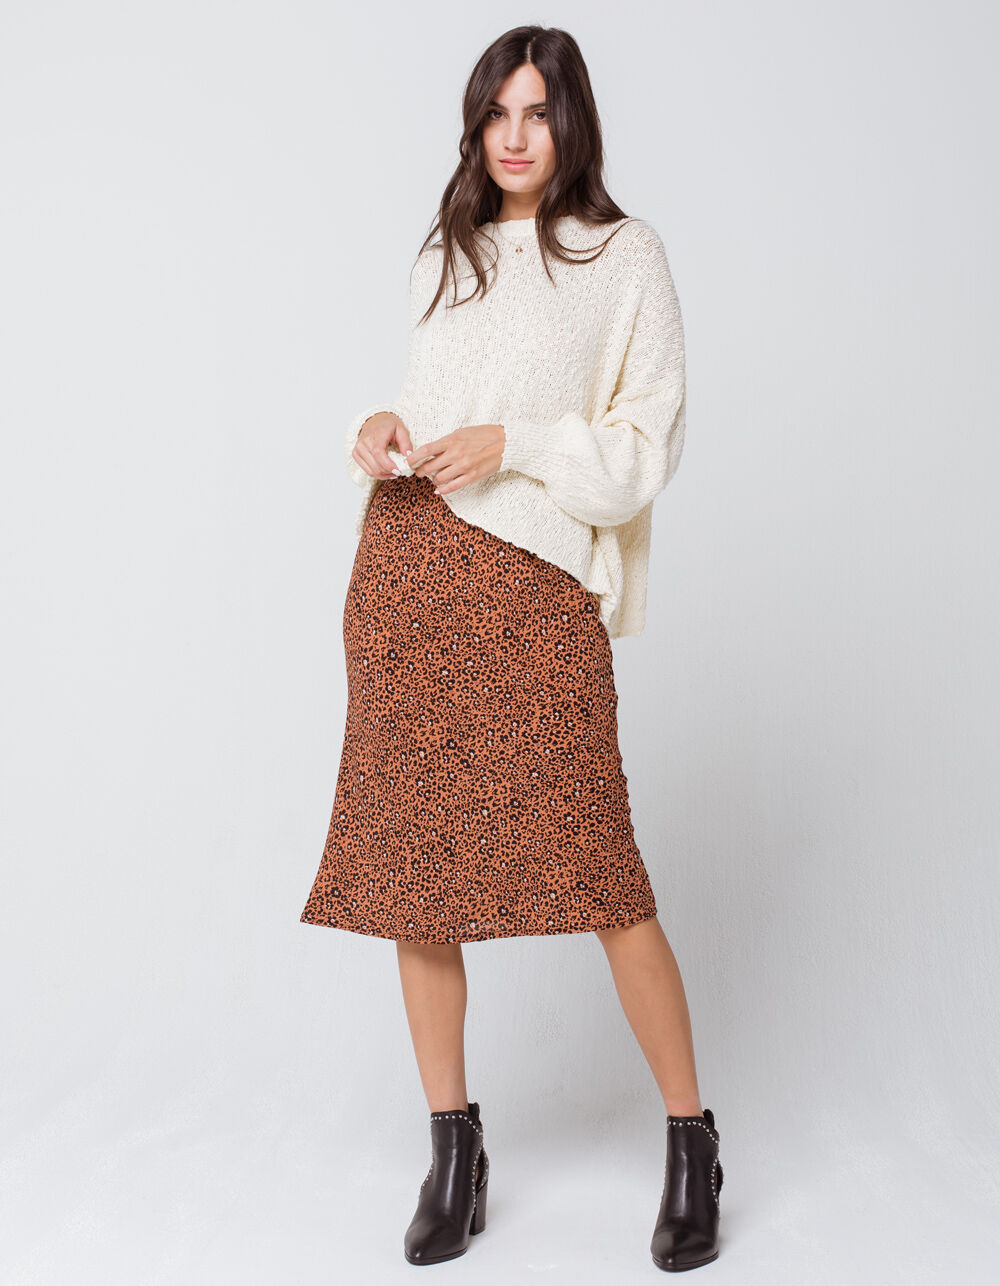 SKY AND SPARROW Leopard Midi Skirt image number 1